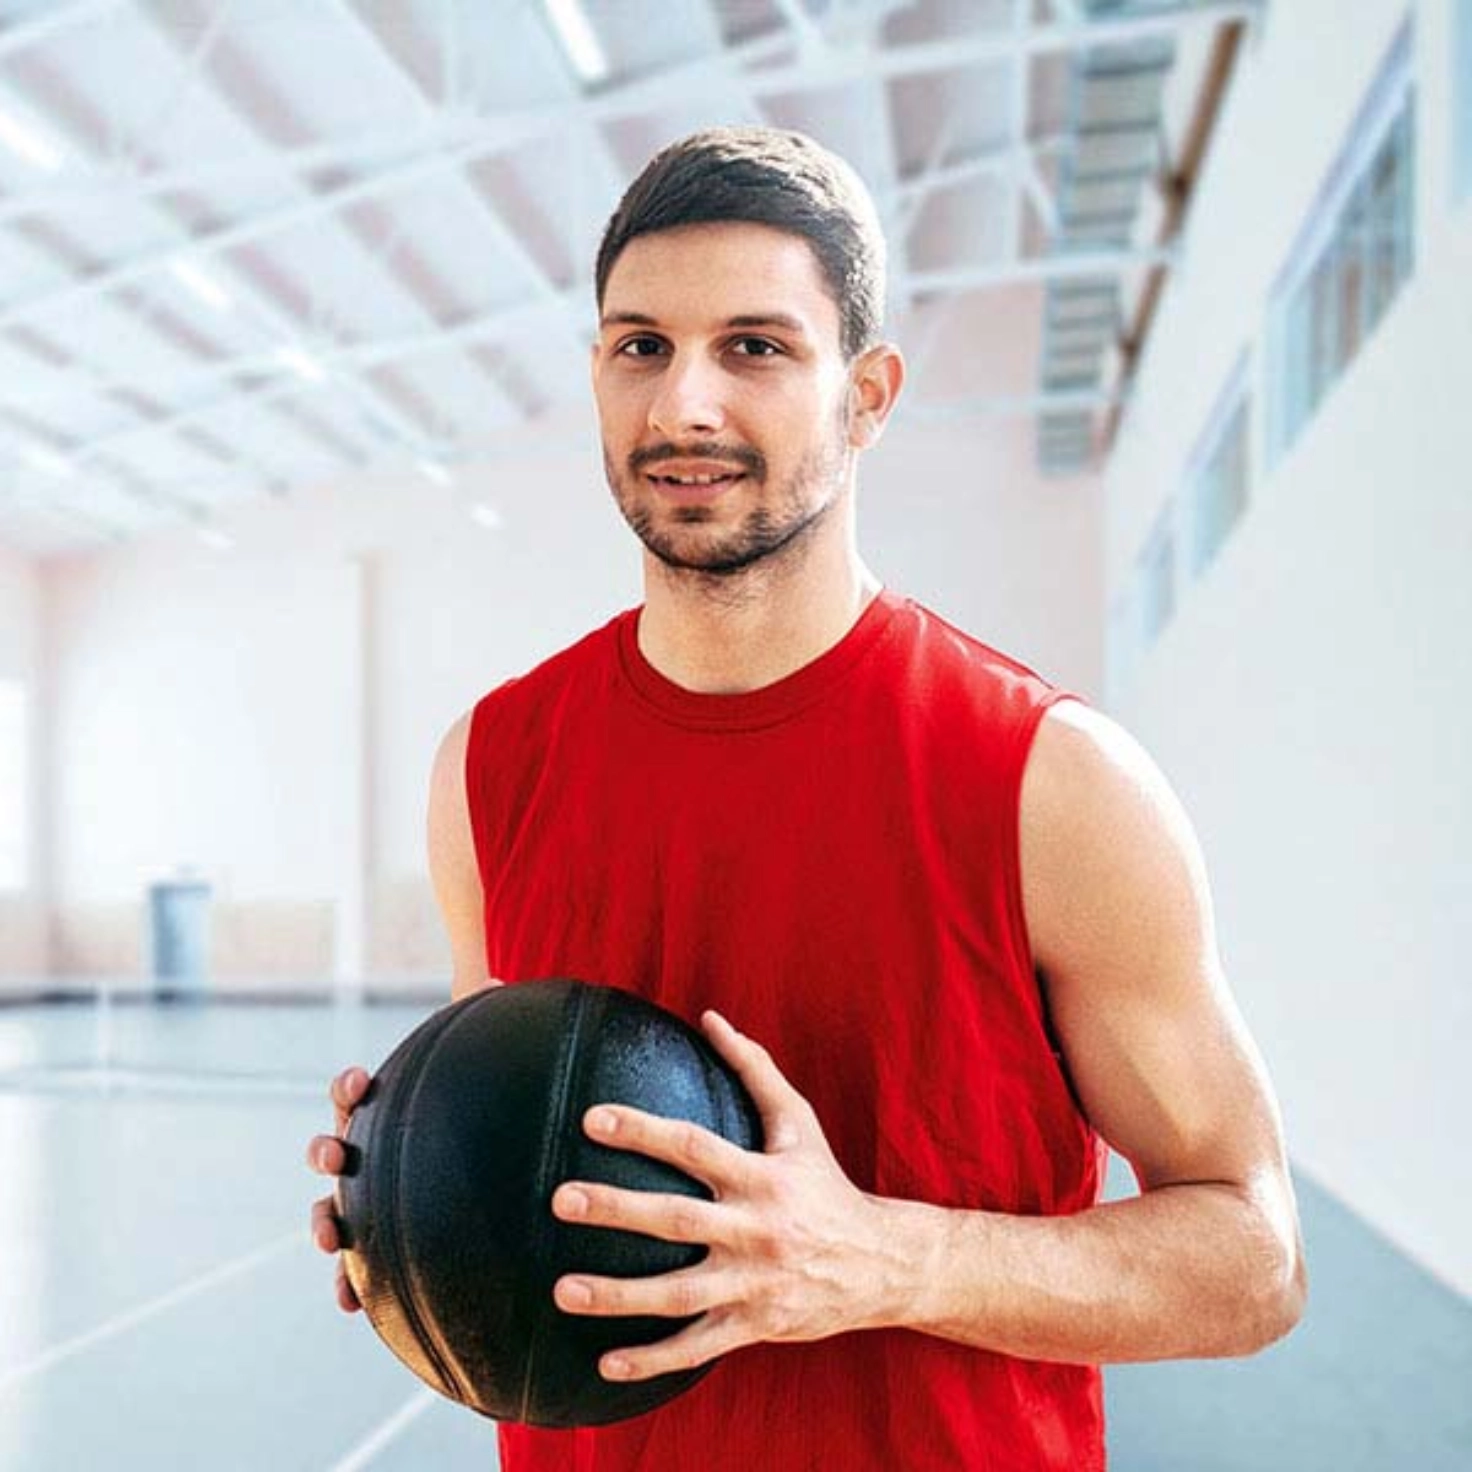 Man in gym holding basketball in his hands